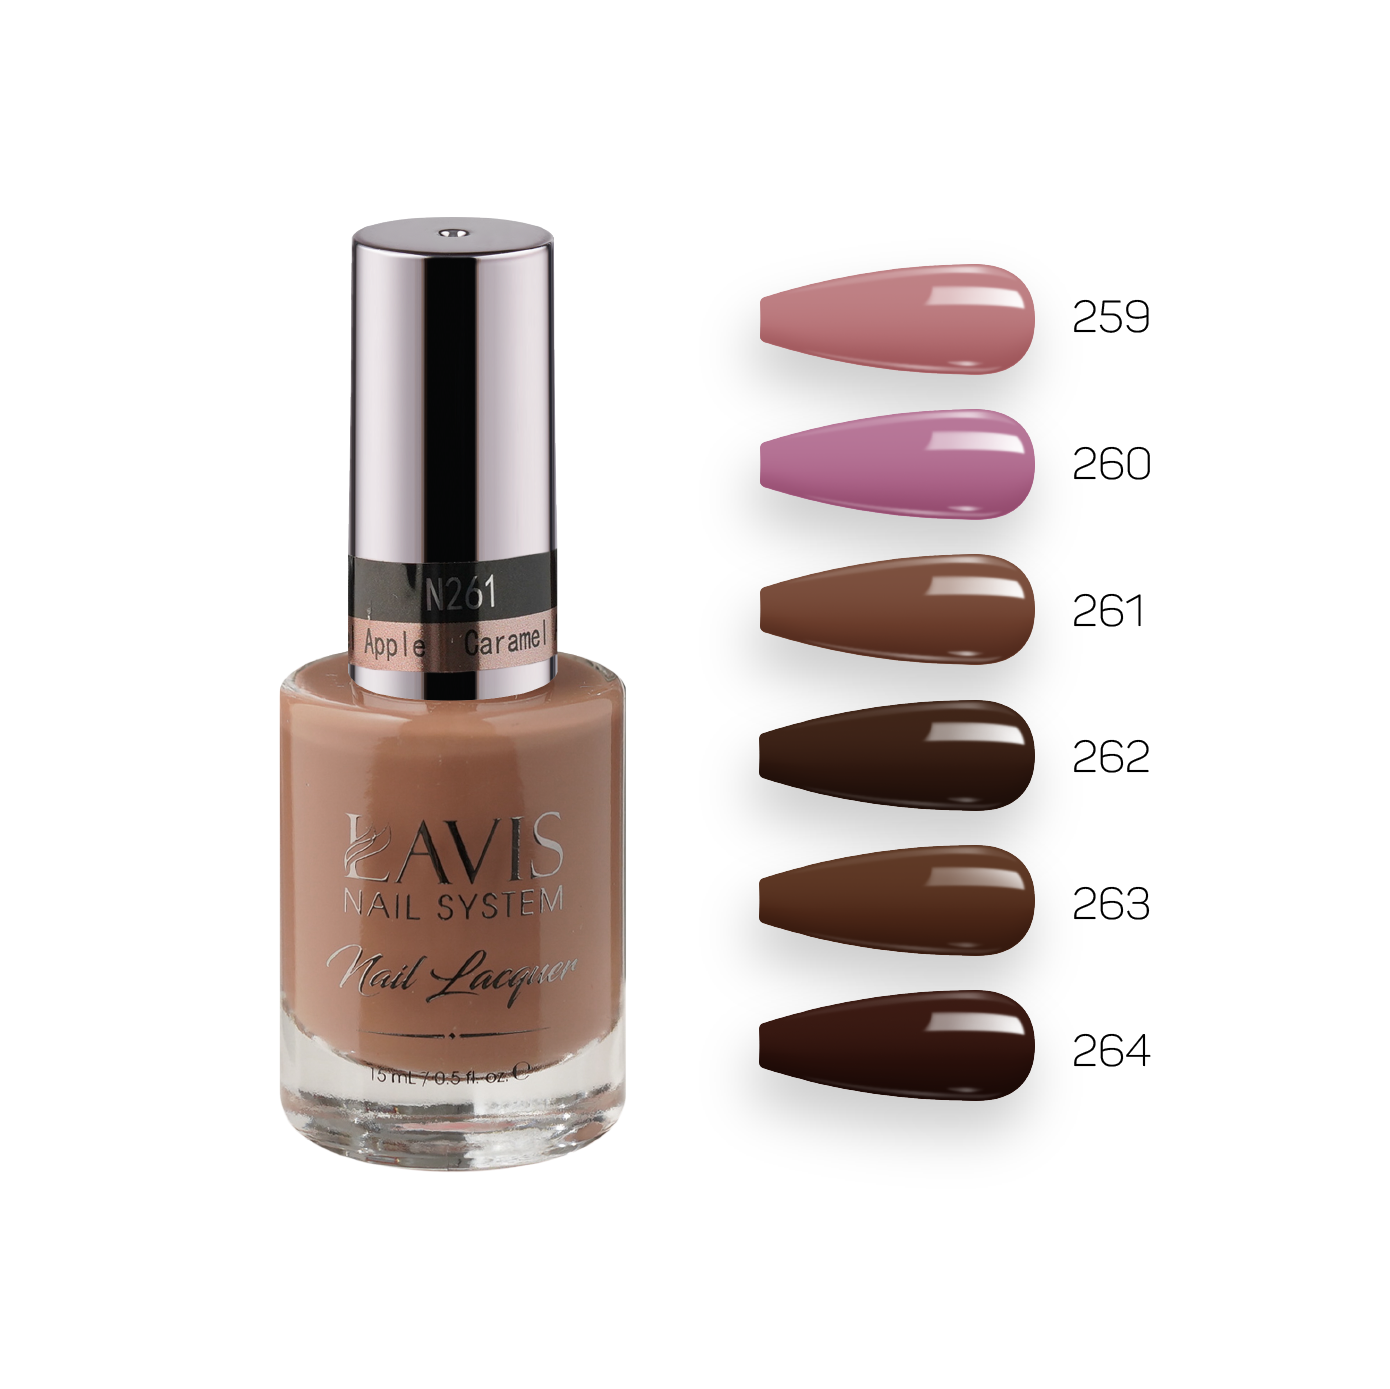 Lavis Healthy Nail Lacquer Fall Winter Set N4 (6 colors) : 259, 260, 261, 262, 263, 264